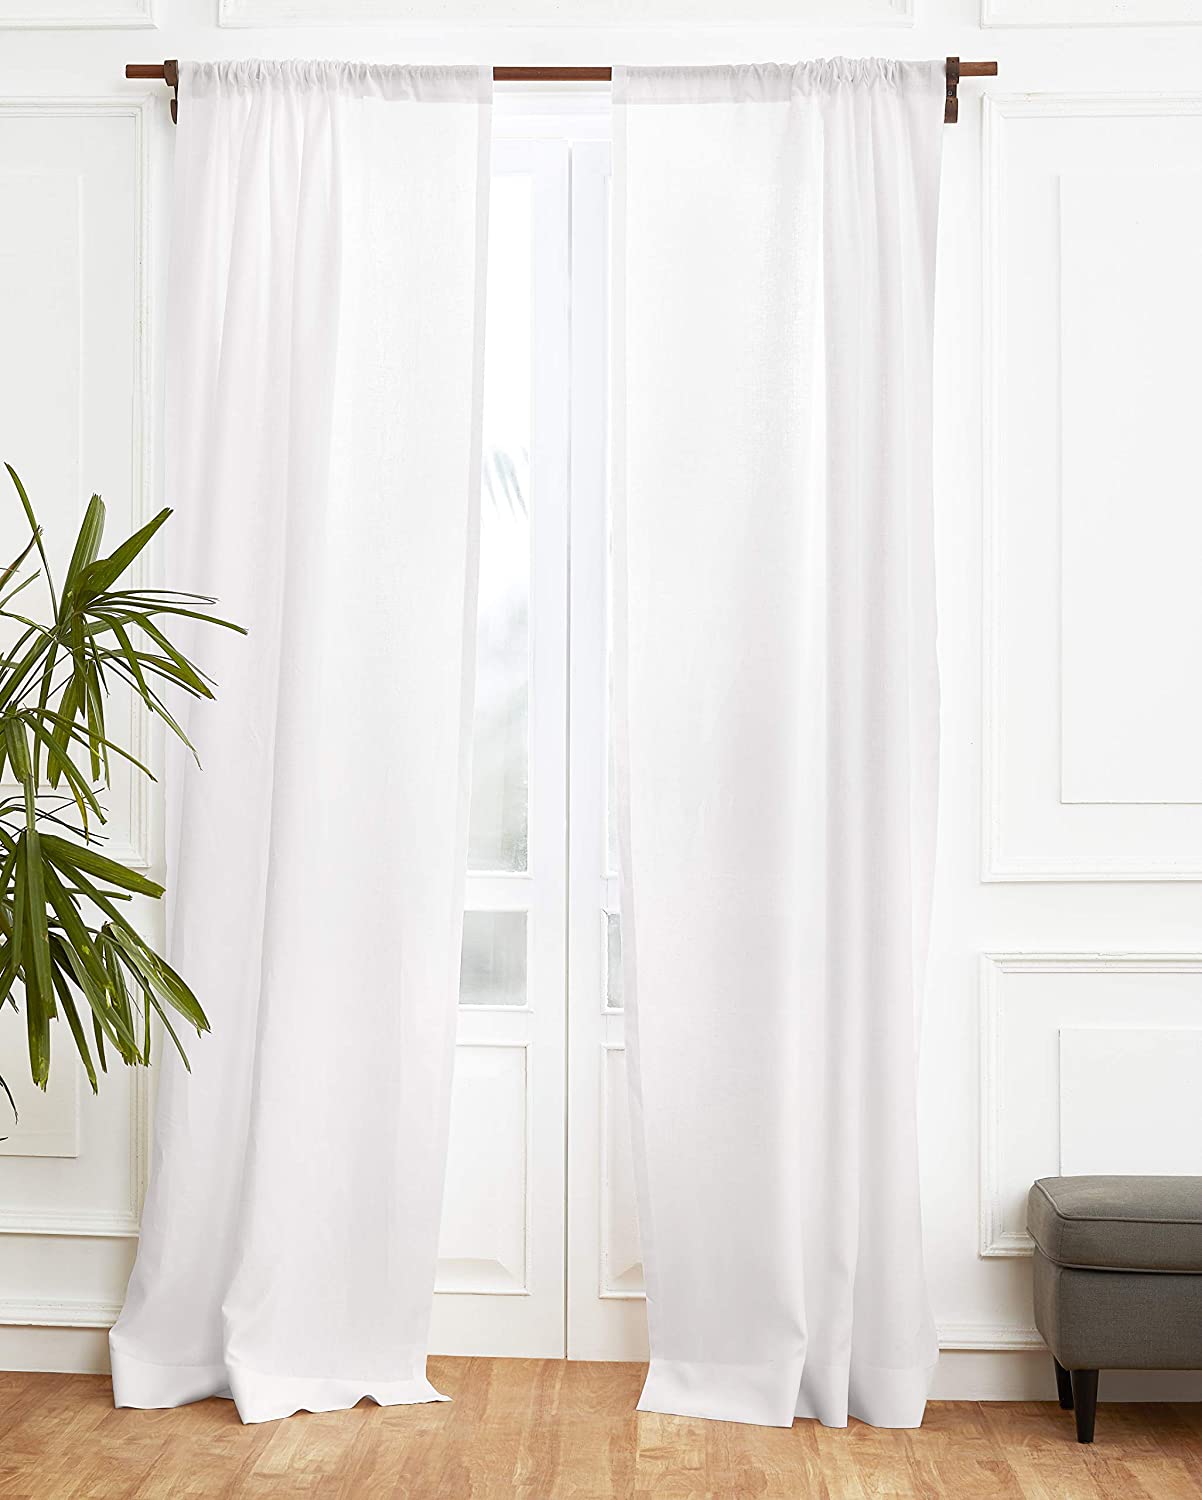 Solino Home 100% Pure Linen Curtain – 52 x 96 Inch White Lightweight ...